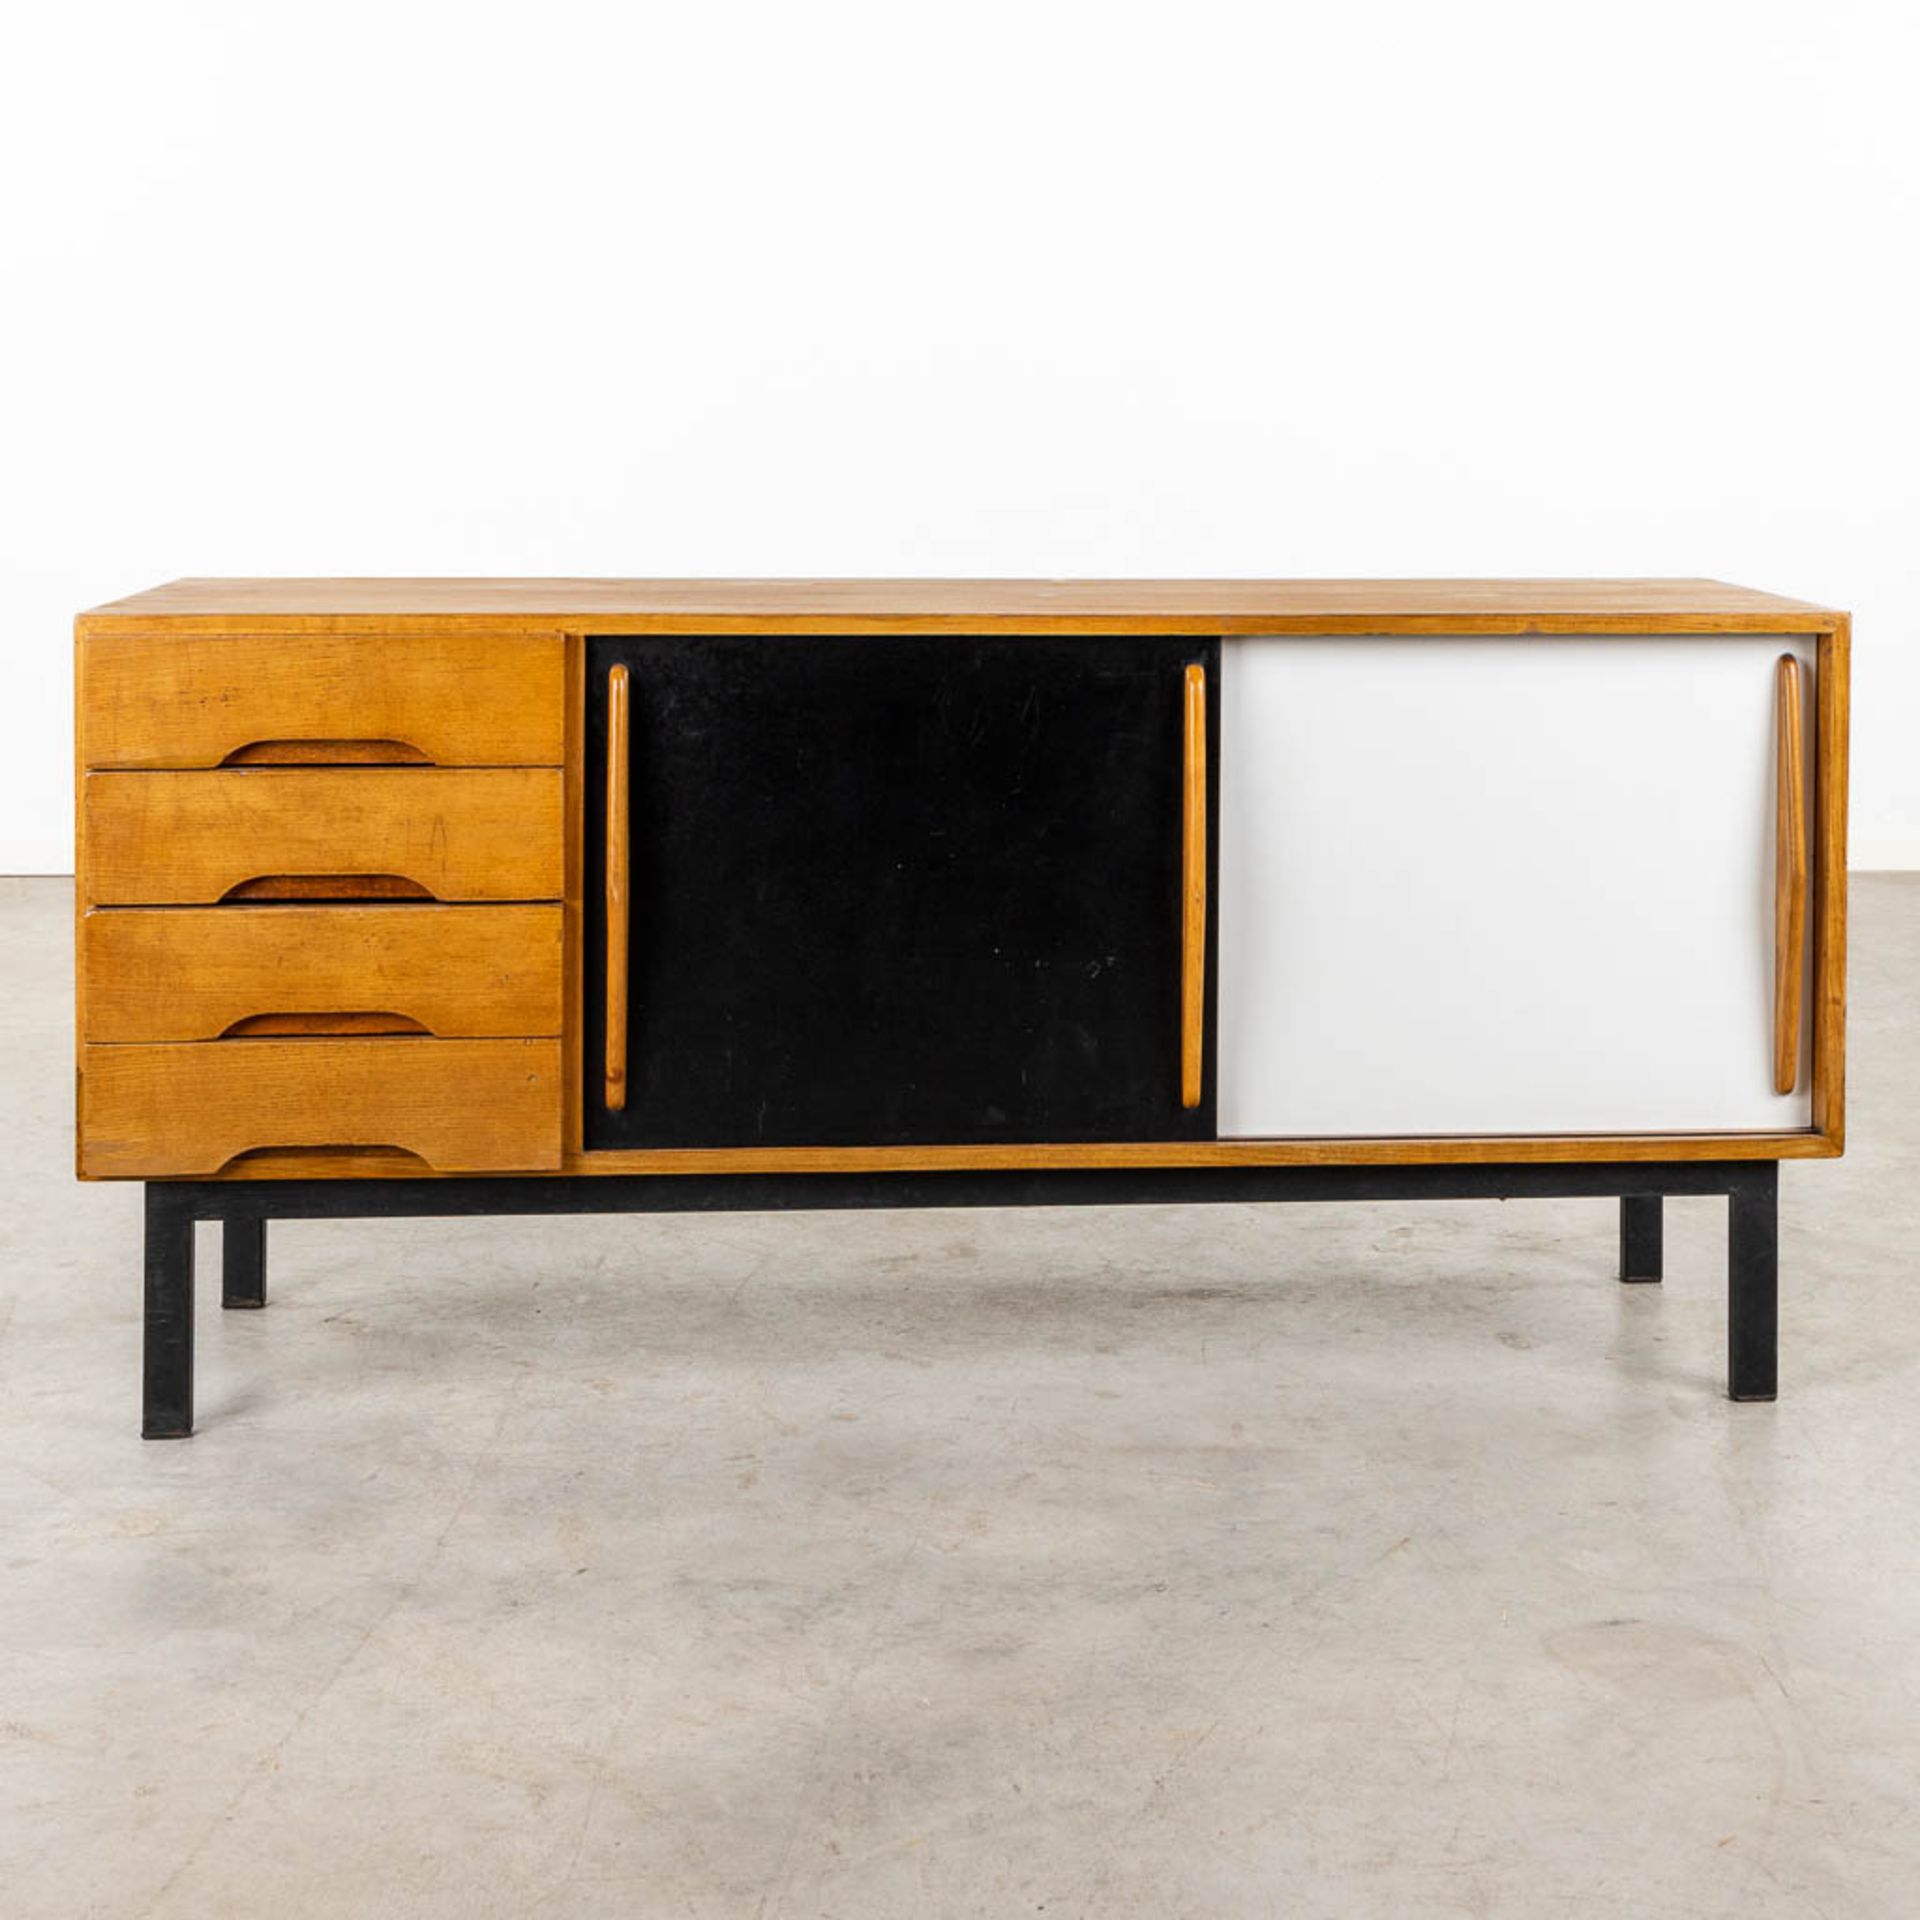 Charlotte PERRIAND (1903-1999) 'Cansado' a sideboard (D:47 x W:158 x H:73 cm) - Image 5 of 16